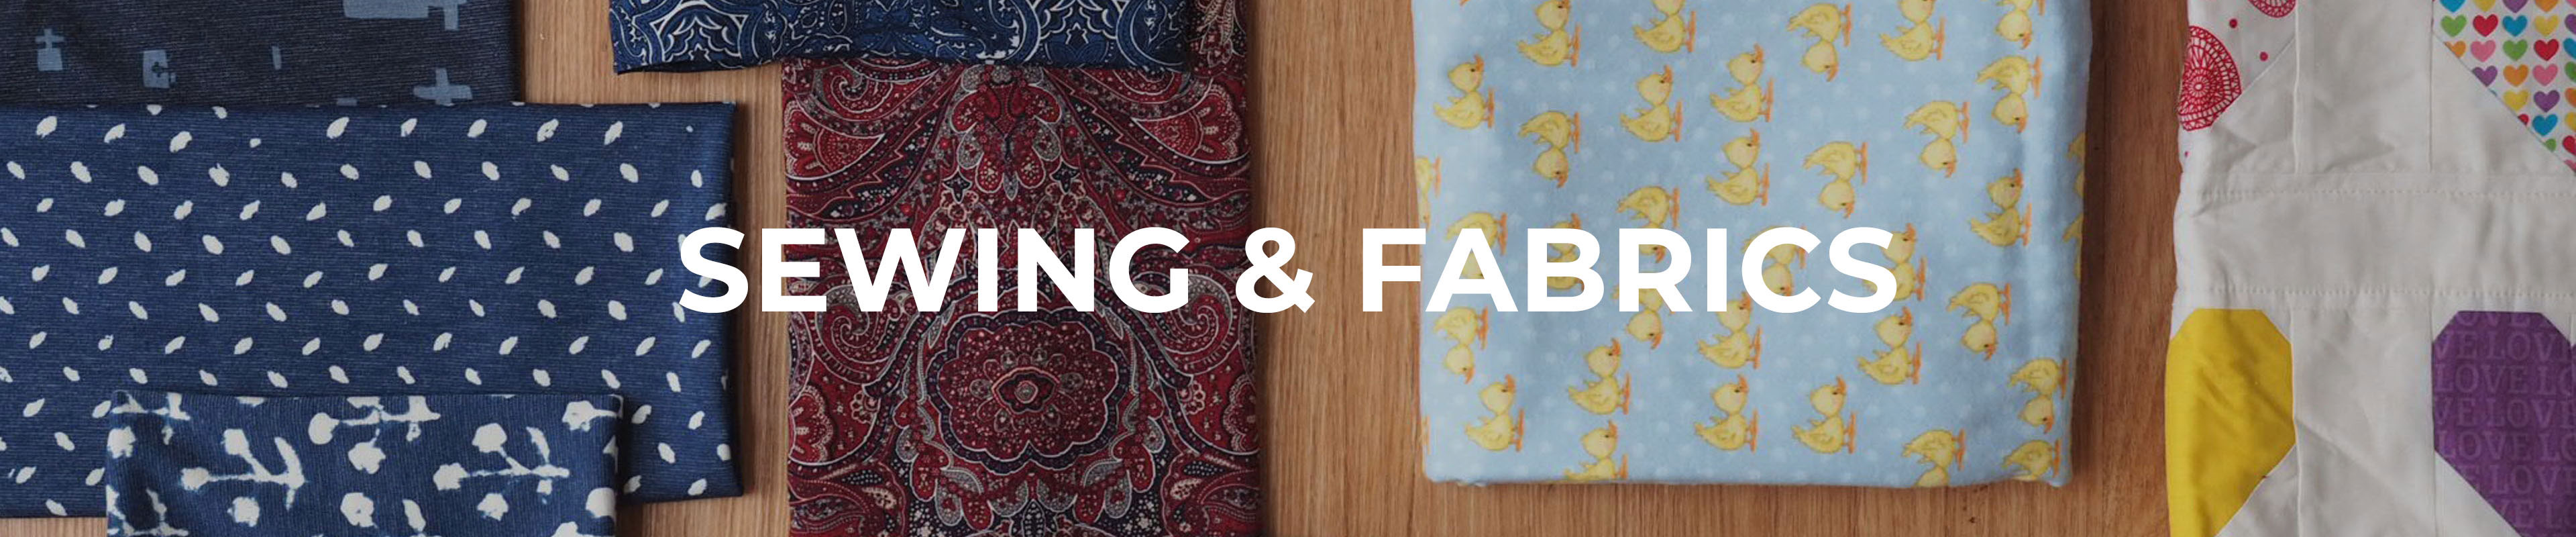 Shop Our Sewing & Fabrics Range